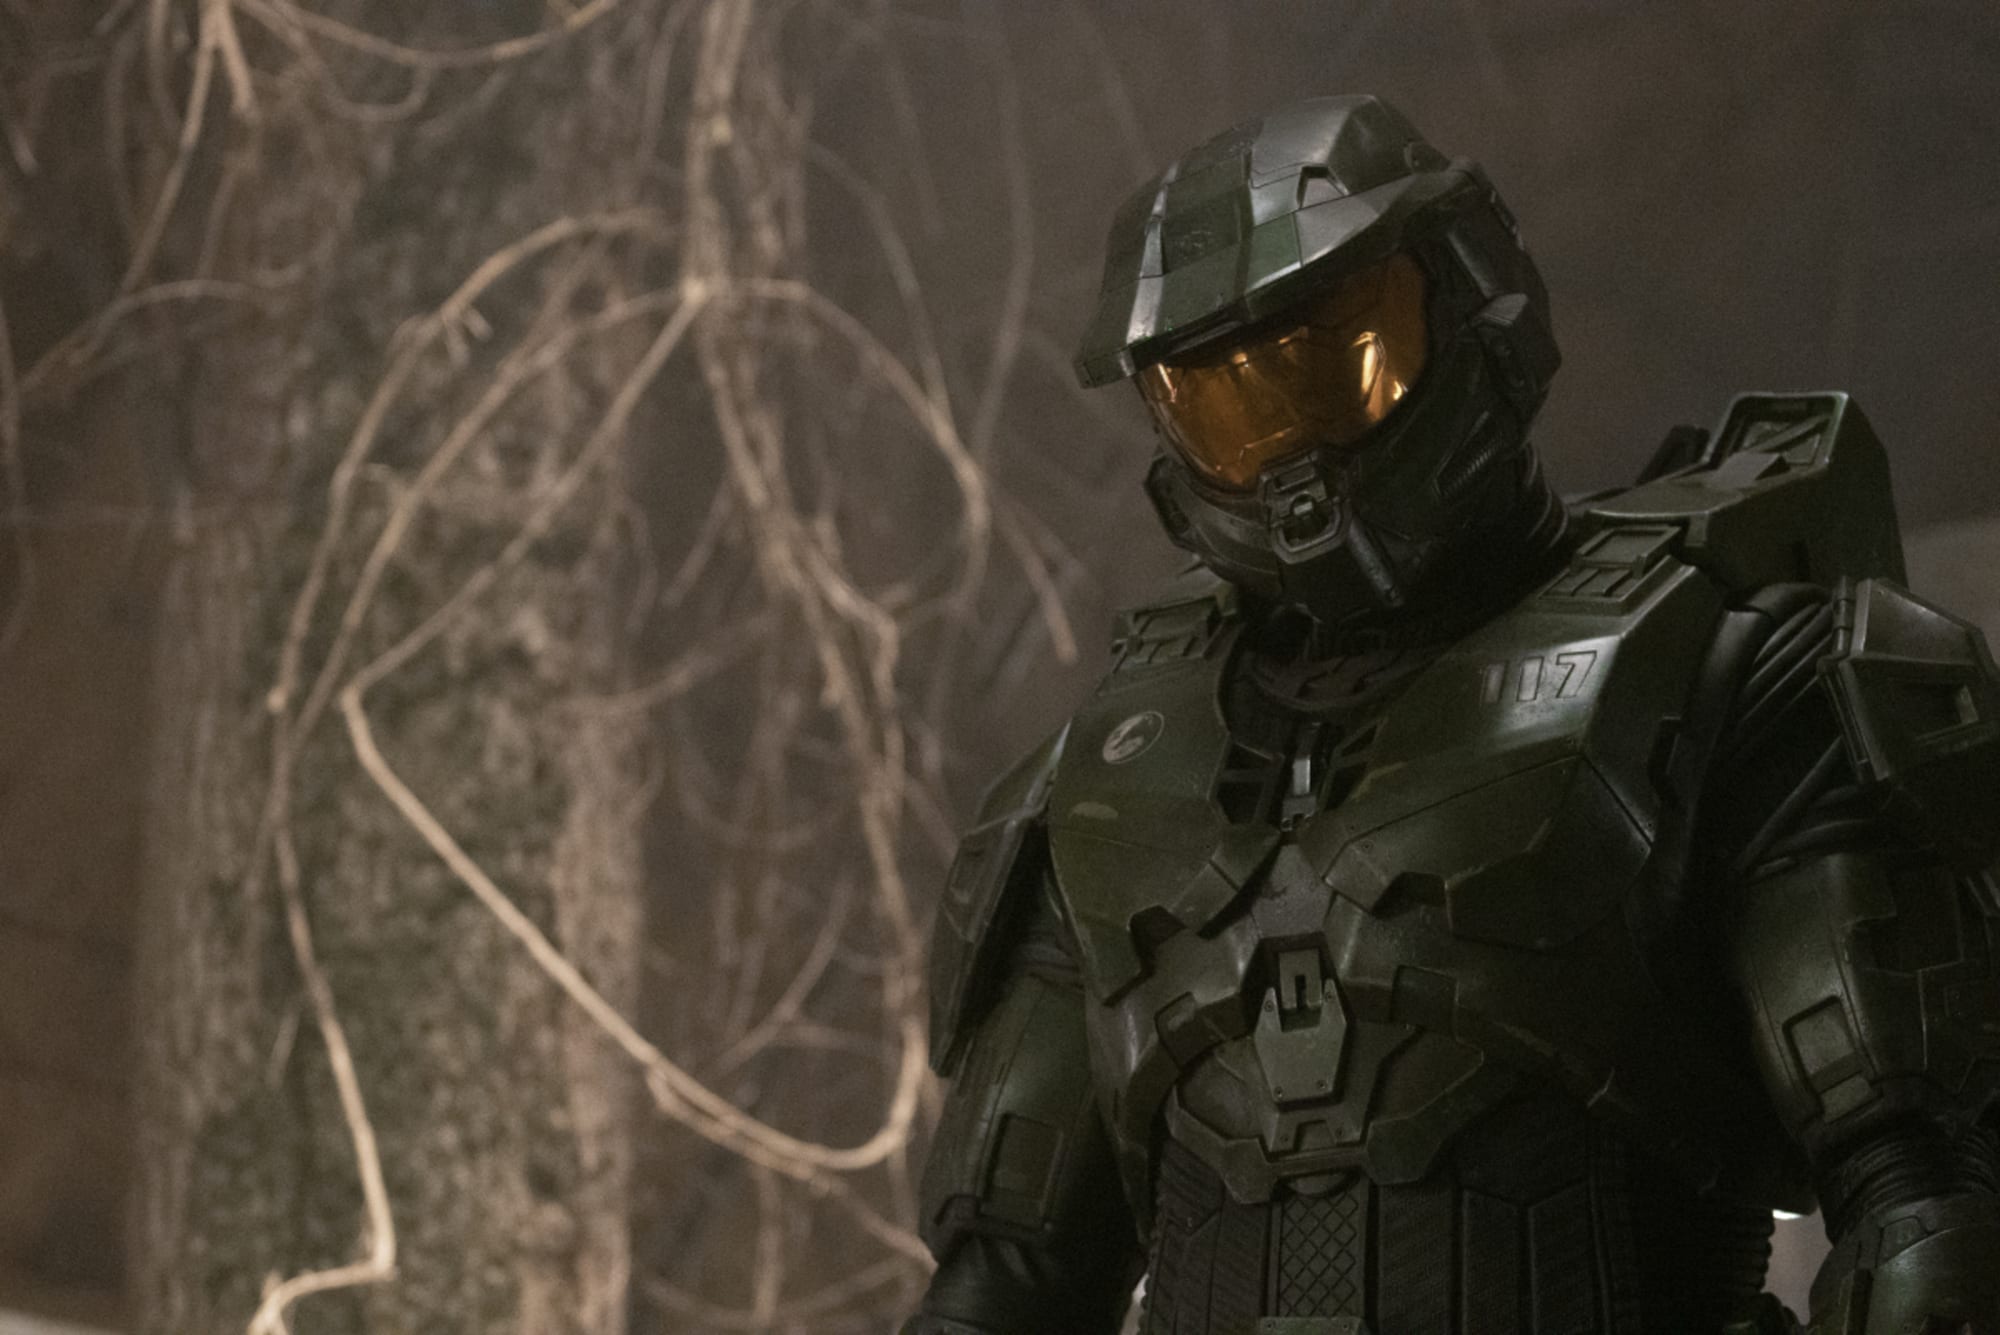 Interview: How the Halo show's producers changed the franchise